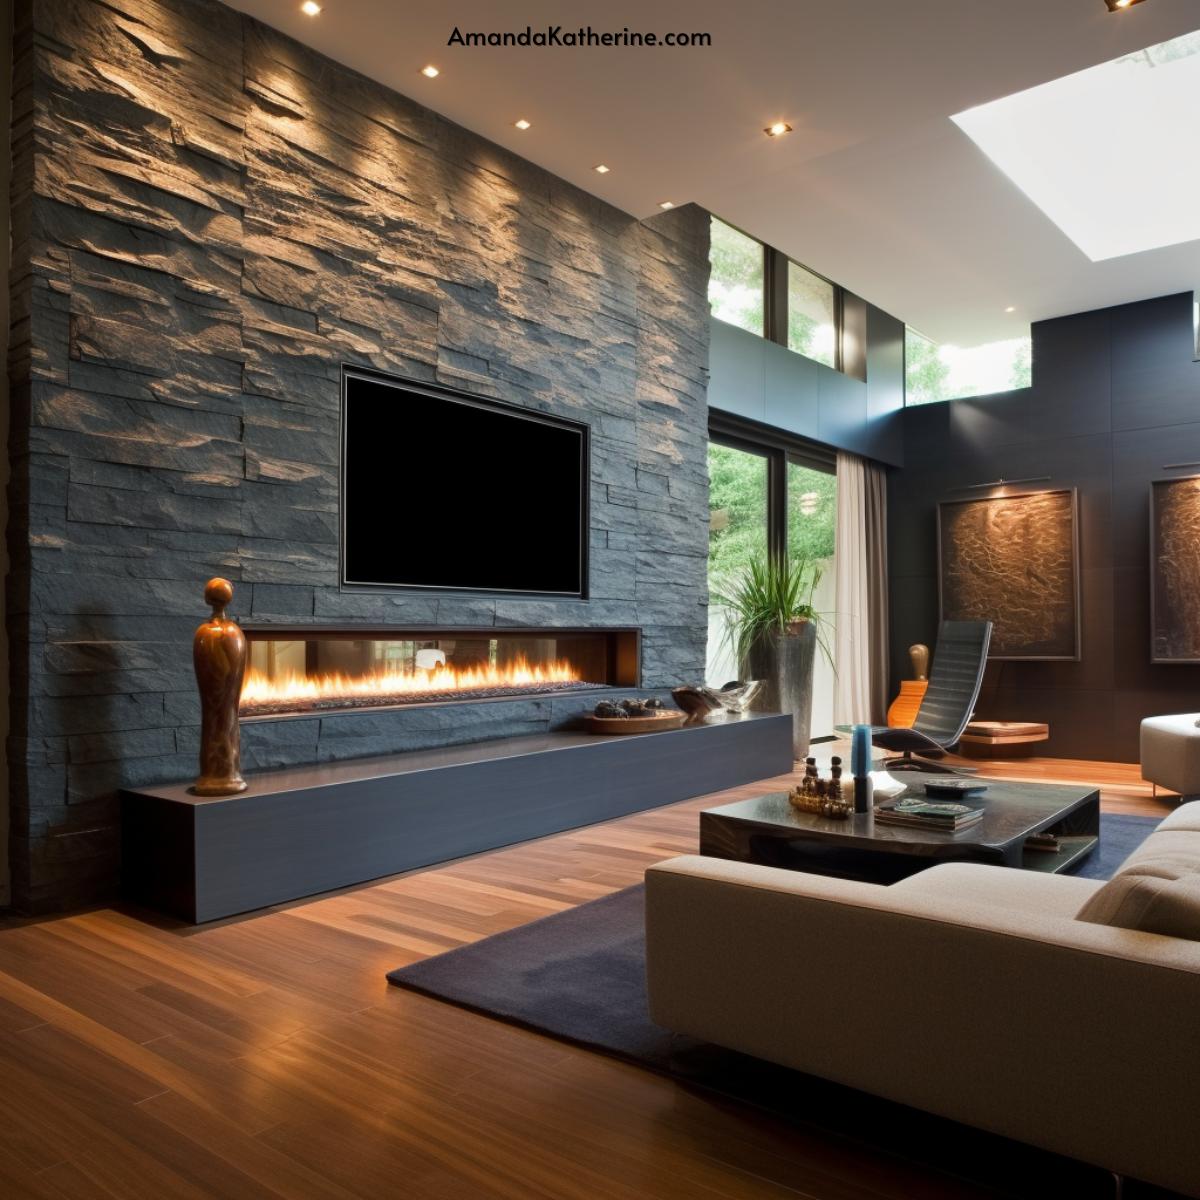 31 Stunning Fireplace Wall Ideas with a TV for Your Living Room